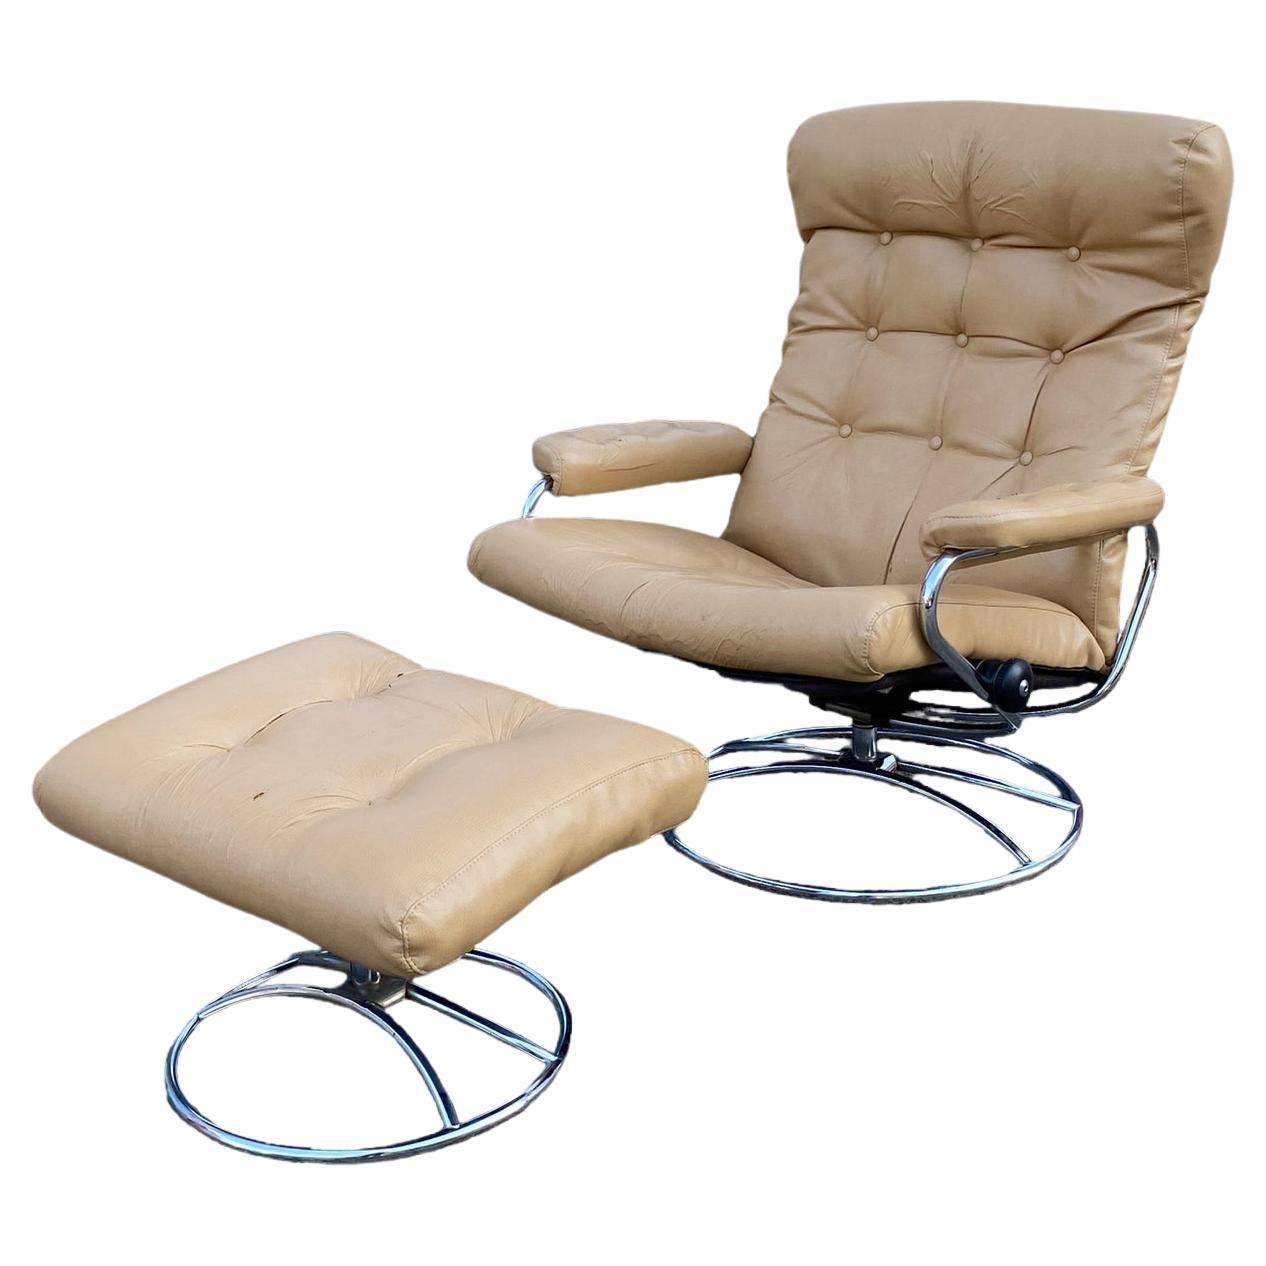 Ekornes Stressless Reclining Lounge Chair and Ottoman For Sale